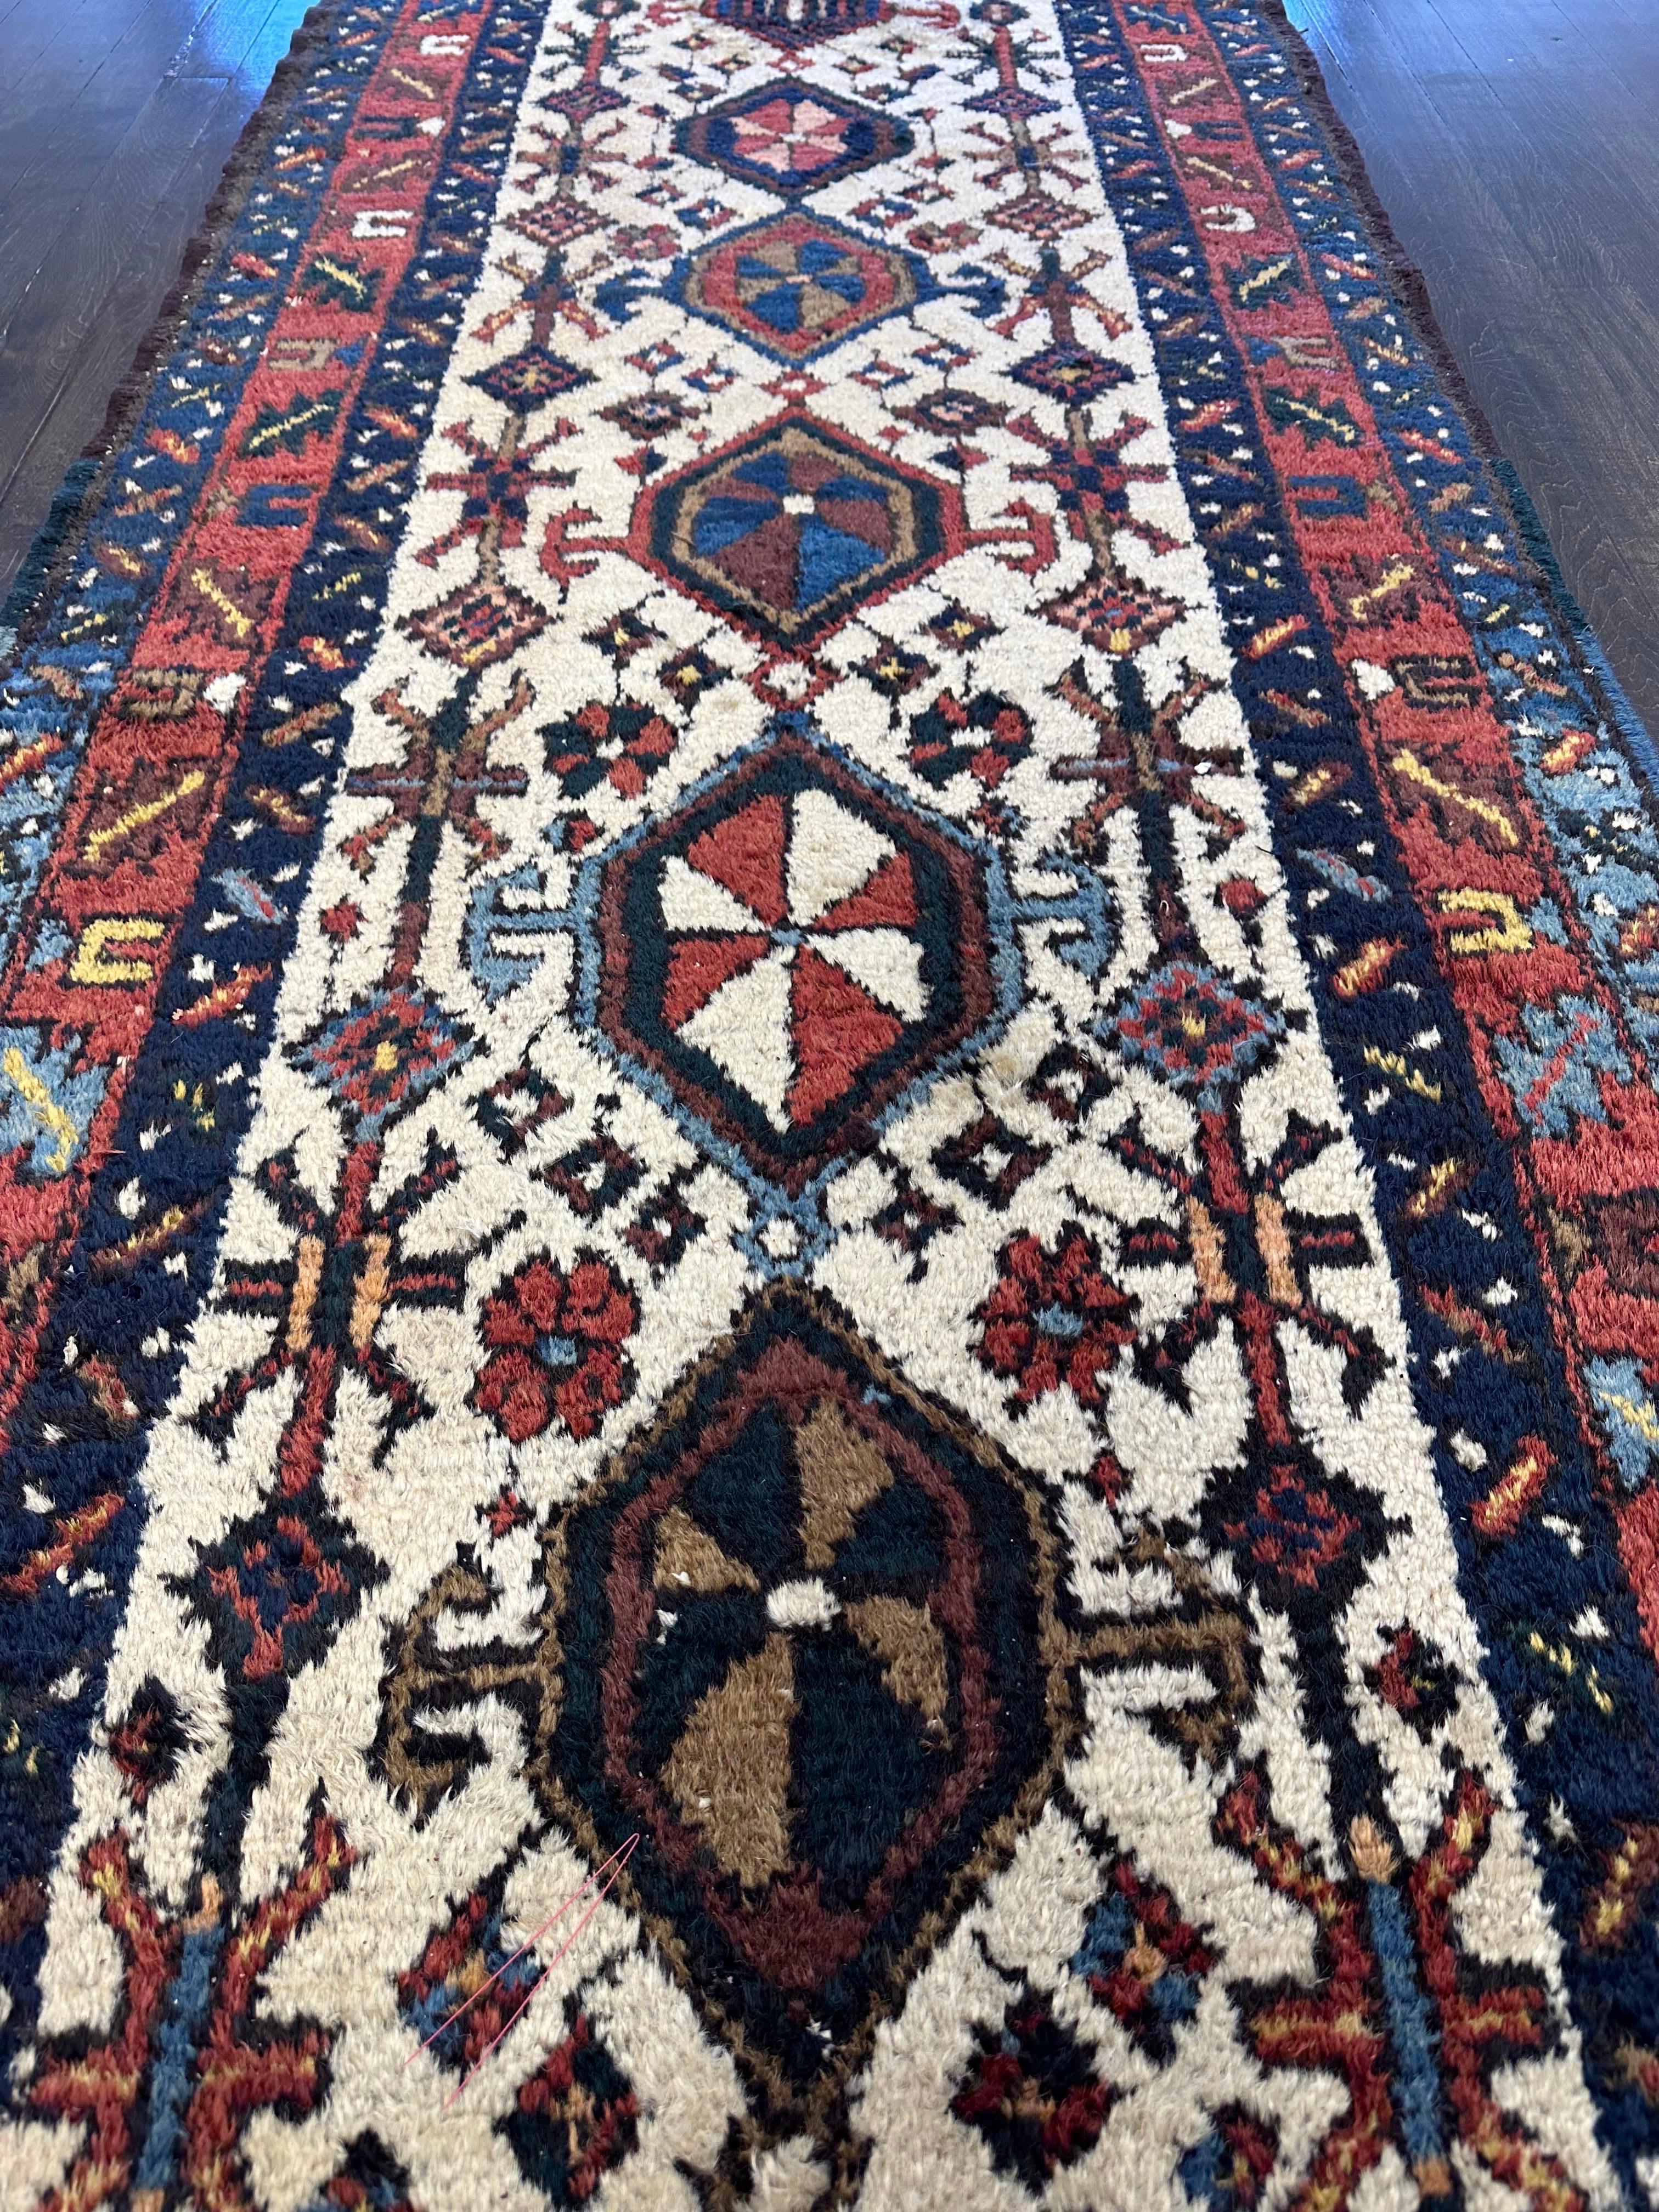 Vintage Long Heriz Rug Runner 2’10x12’5 In Fair Condition For Sale In Morton Grove, IL